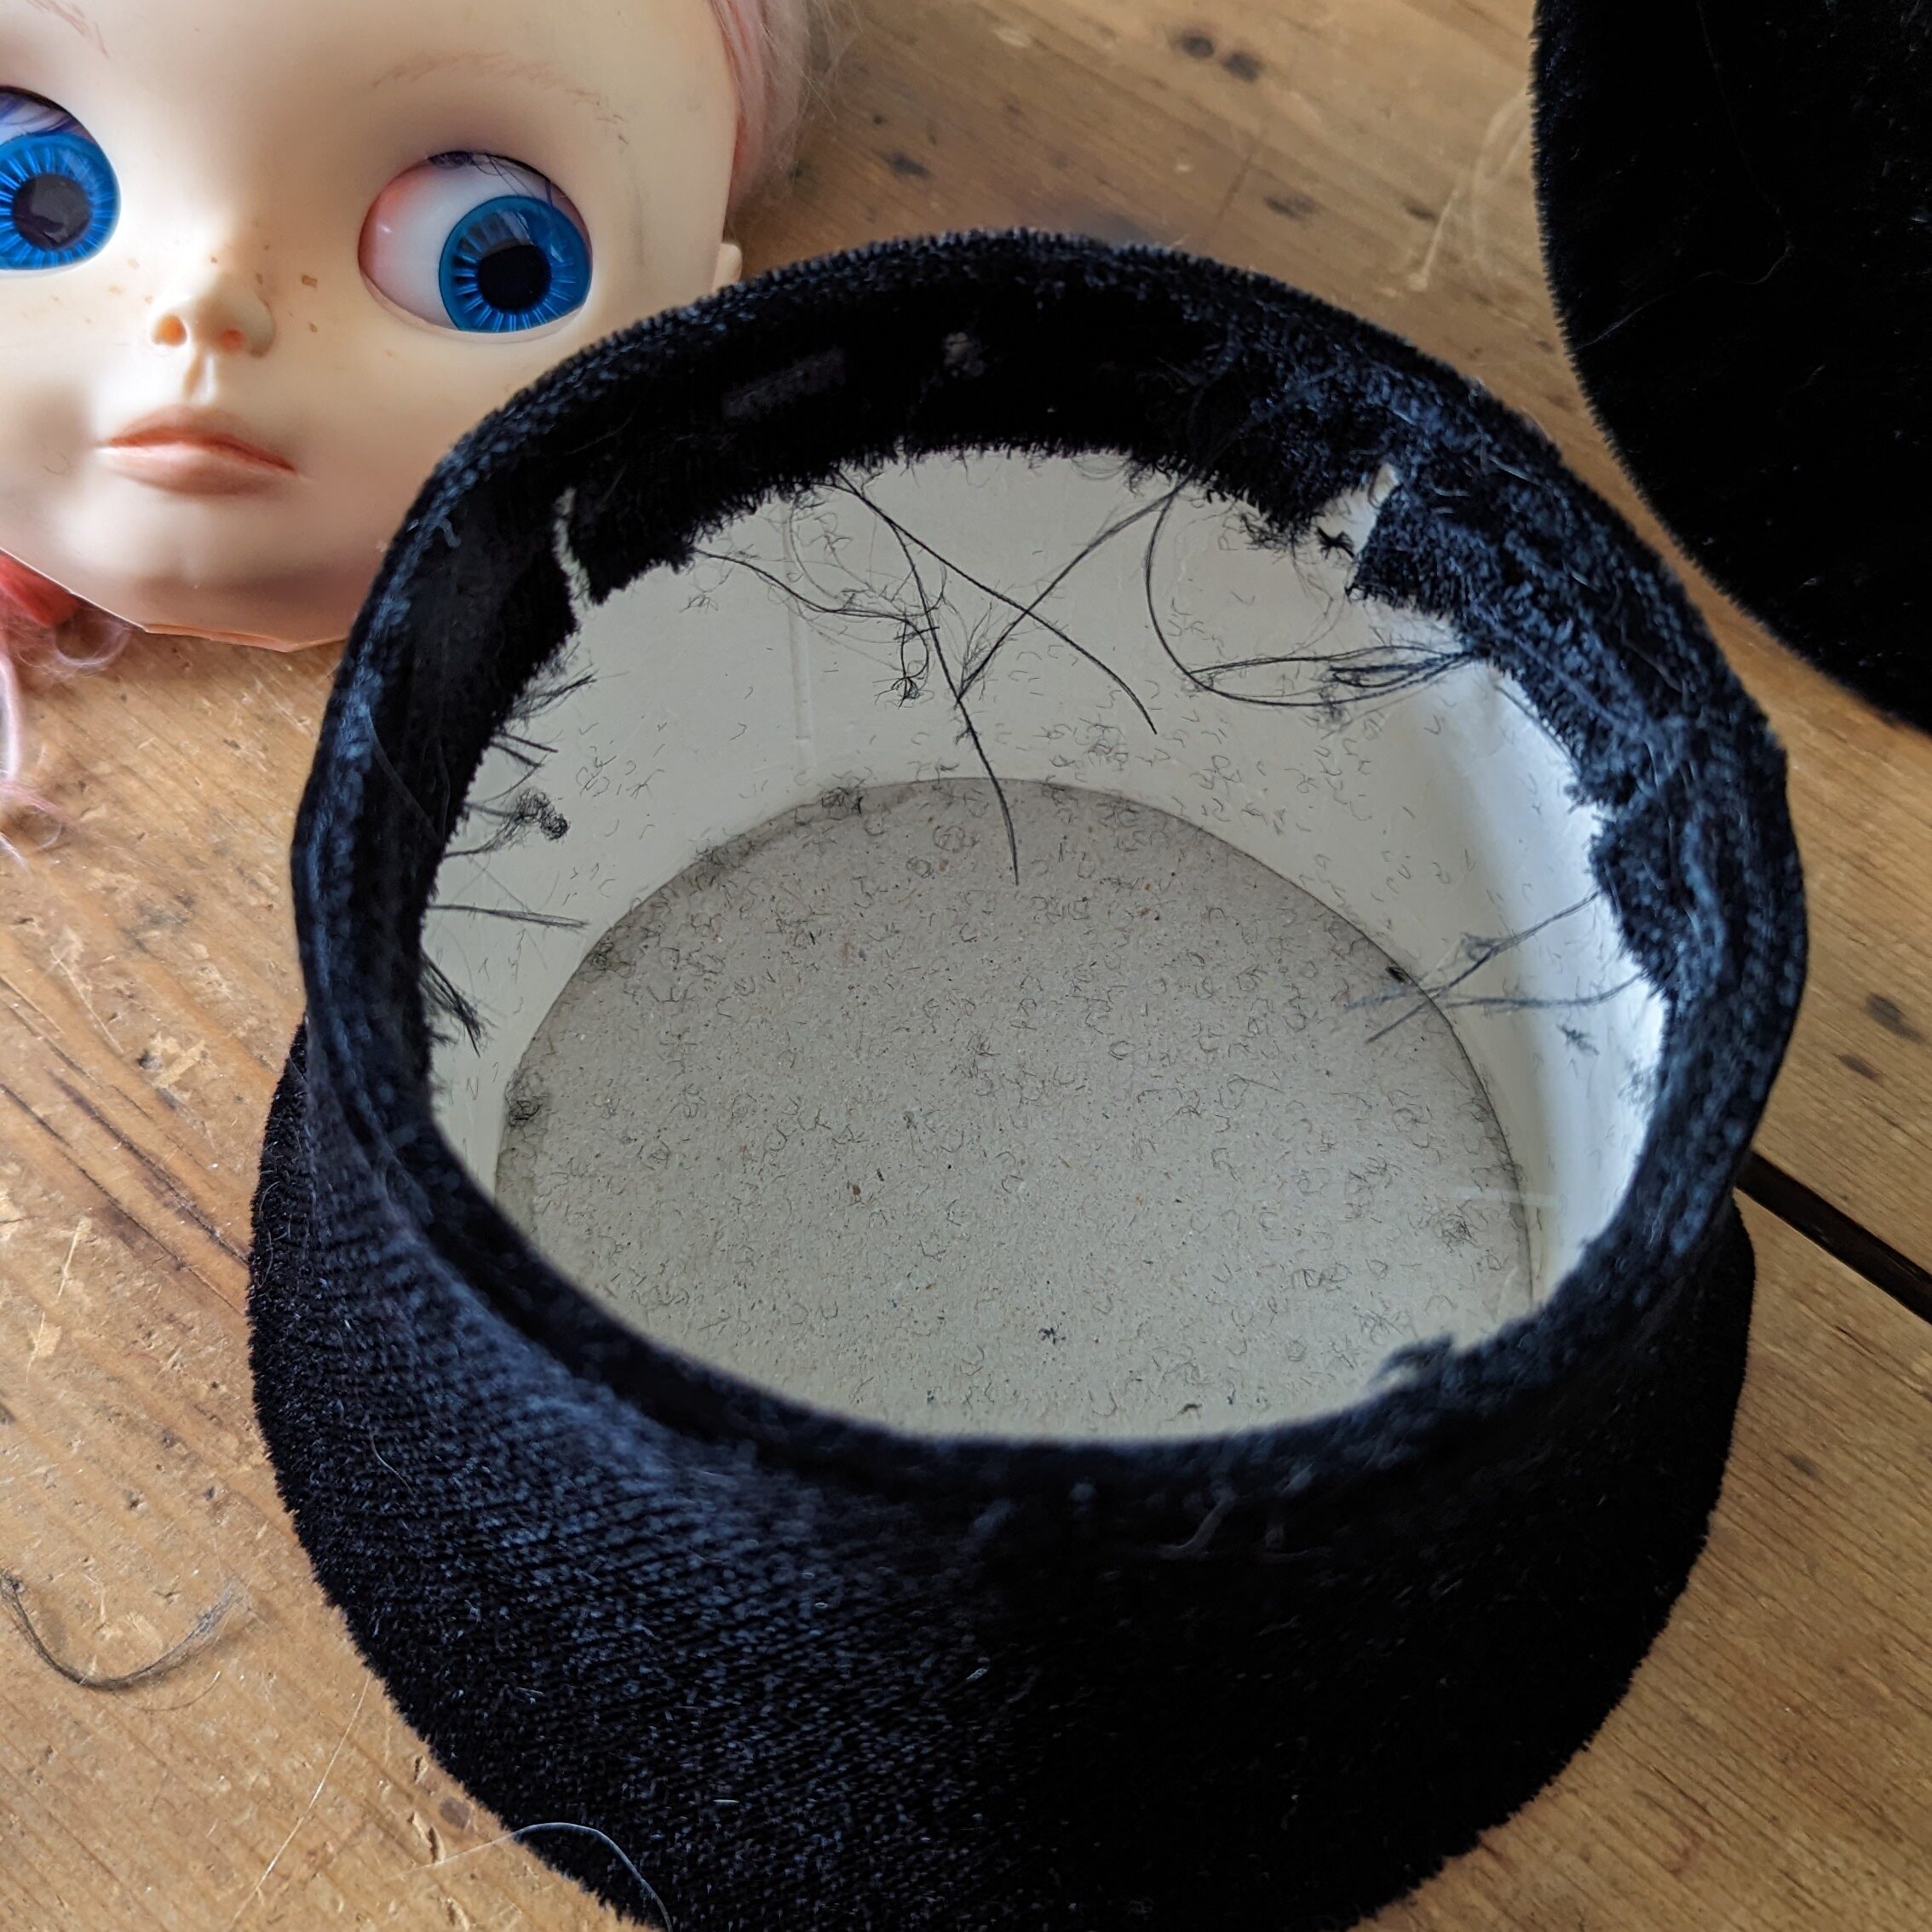 wip of a top hat for art dolls